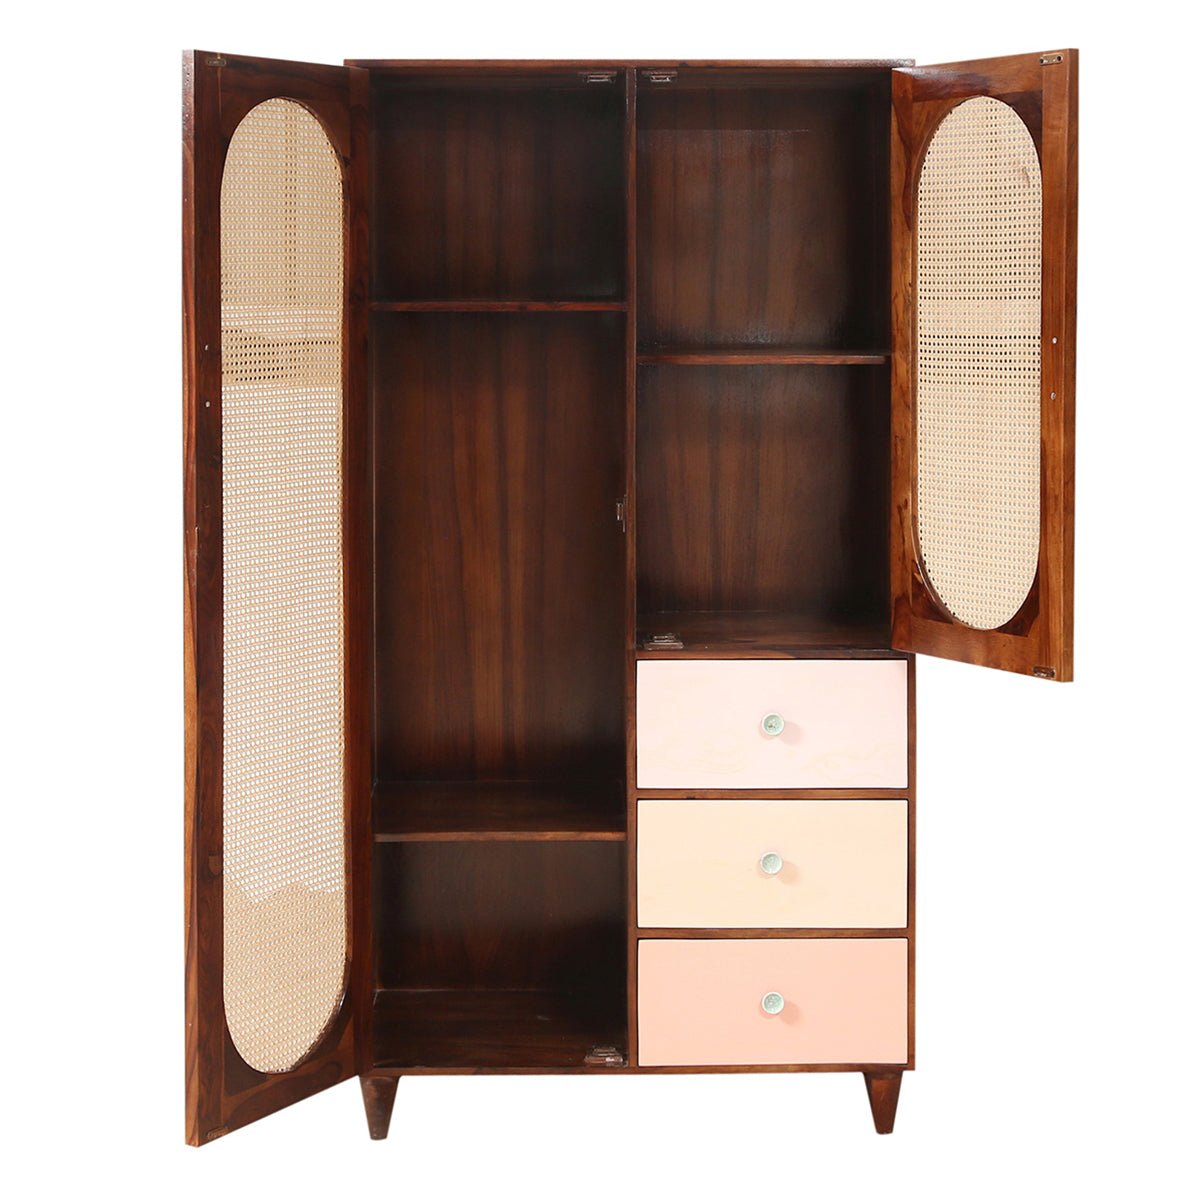 Ventura Modern Rattan Door Tall Armoire with 3 Drawers